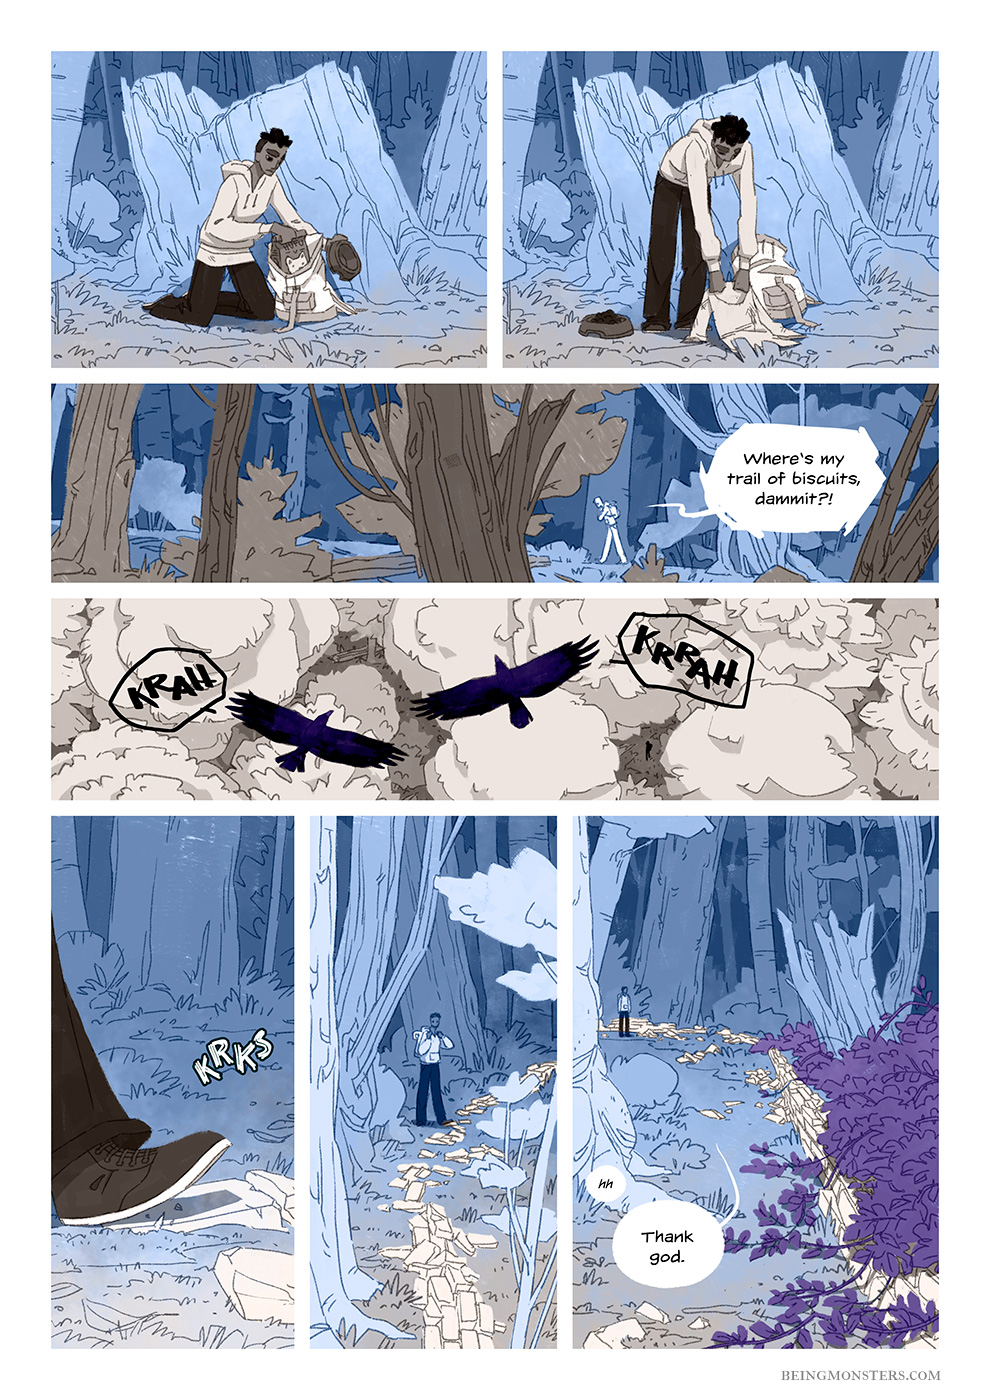 Being Monsters Book 1 Chapter 3 page 03